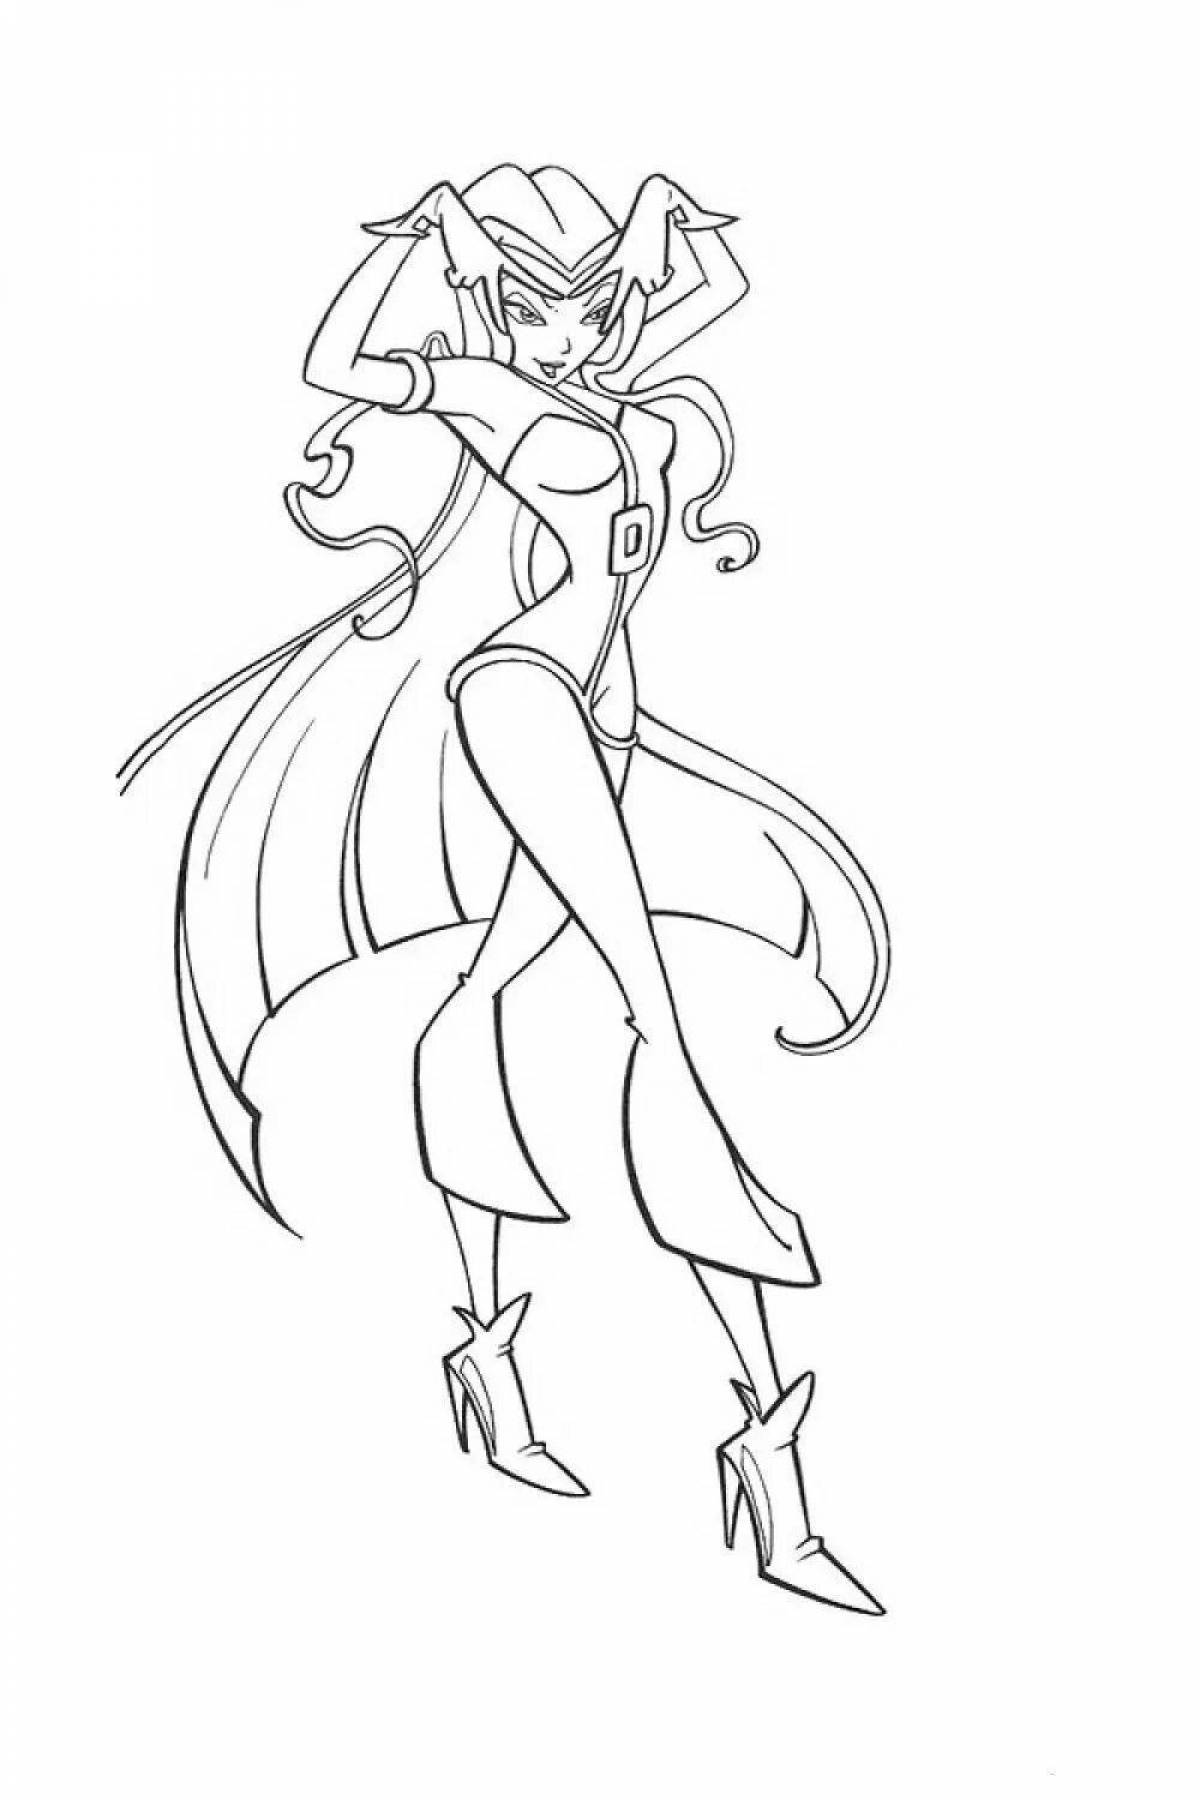 Awesome winx trix coloring page